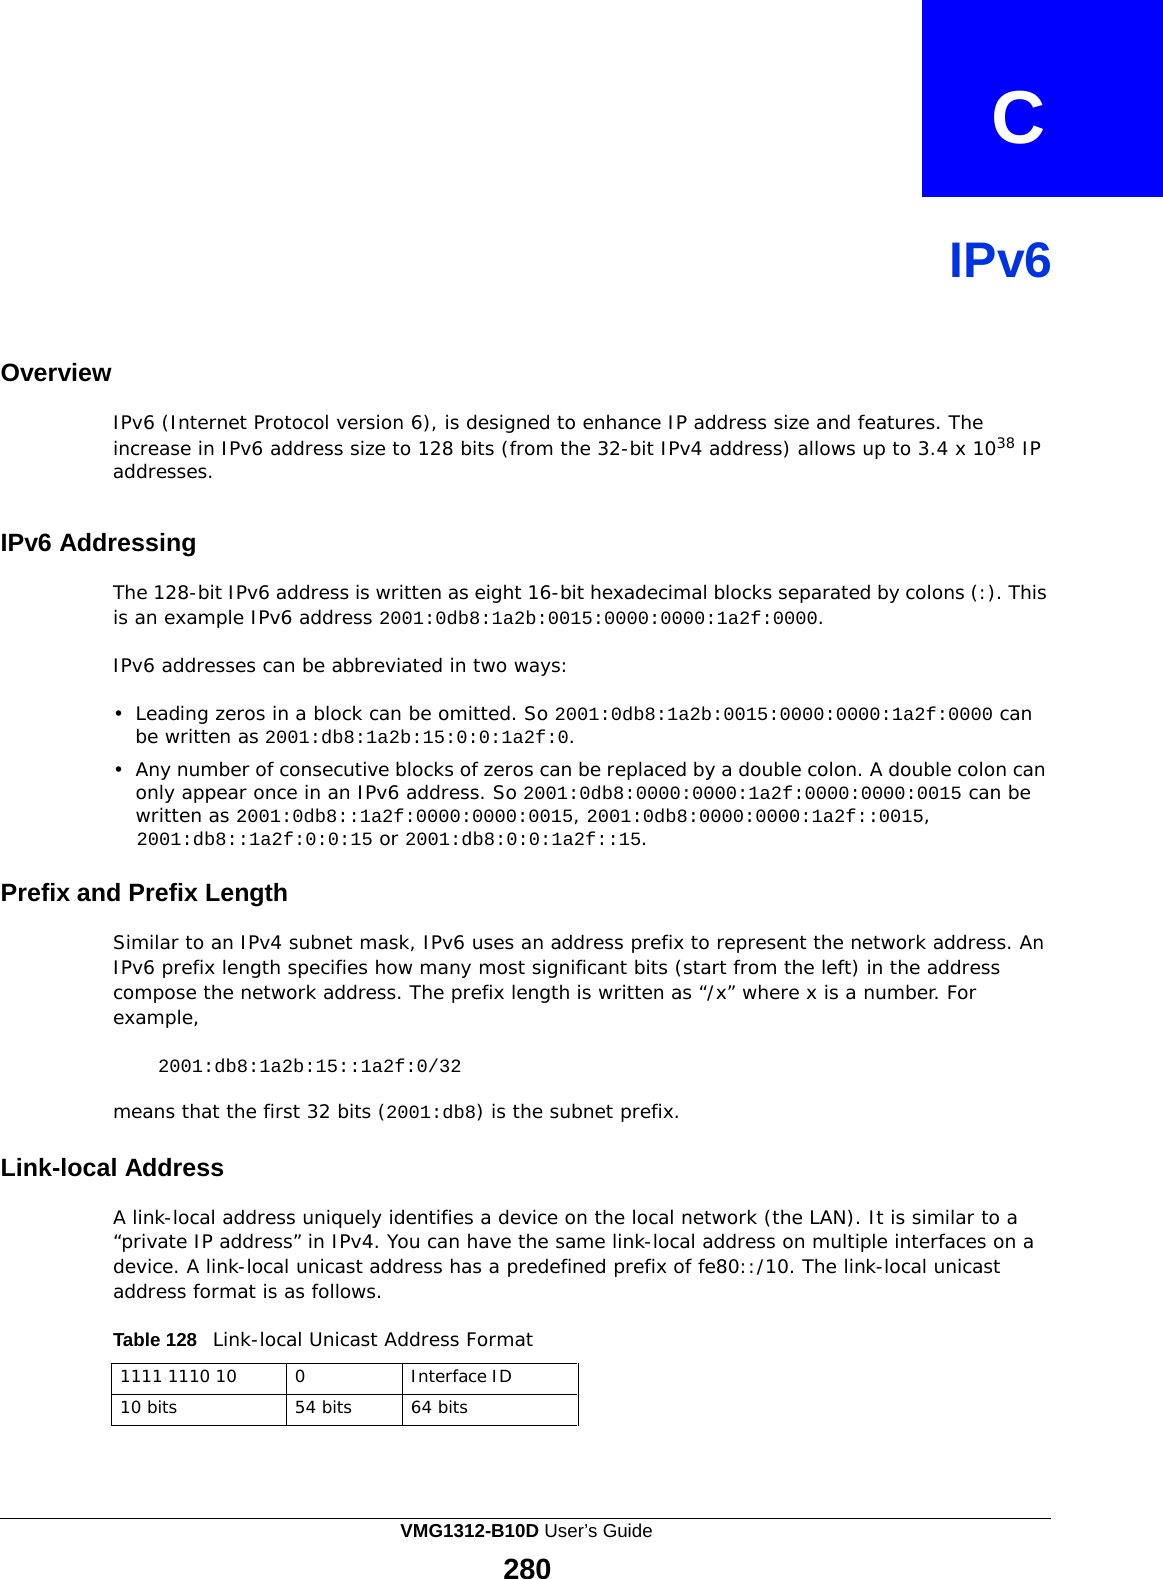  C    IPv6    Overview  IPv6 (Internet Protocol version 6), is designed to enhance IP address size and features. The increase in IPv6 address size to 128 bits (from the 32-bit IPv4 address) allows up to 3.4 x 1038 IP addresses.   IPv6 Addressing  The 128-bit IPv6 address is written as eight 16-bit hexadecimal blocks separated by colons (:). This is an example IPv6 address 2001:0db8:1a2b:0015:0000:0000:1a2f:0000.  IPv6 addresses can be abbreviated in two ways:  •  Leading zeros in a block can be omitted. So 2001:0db8:1a2b:0015:0000:0000:1a2f:0000 can be written as 2001:db8:1a2b:15:0:0:1a2f:0.  •  Any number of consecutive blocks of zeros can be replaced by a double colon. A double colon can only appear once in an IPv6 address. So 2001:0db8:0000:0000:1a2f:0000:0000:0015 can be written as 2001:0db8::1a2f:0000:0000:0015, 2001:0db8:0000:0000:1a2f::0015, 2001:db8::1a2f:0:0:15 or 2001:db8:0:0:1a2f::15.  Prefix and Prefix Length  Similar to an IPv4 subnet mask, IPv6 uses an address prefix to represent the network address. An IPv6 prefix length specifies how many most significant bits (start from the left) in the address compose the network address. The prefix length is written as “/x” where x is a number. For example,  2001:db8:1a2b:15::1a2f:0/32  means that the first 32 bits (2001:db8) is the subnet prefix.  Link-local Address  A link-local address uniquely identifies a device on the local network (the LAN). It is similar to a “private IP address” in IPv4. You can have the same link-local address on multiple interfaces on a device. A link-local unicast address has a predefined prefix of fe80::/10. The link-local unicast address format is as follows.  Table 128   Link-local Unicast Address Format  1111 1110 10 0 Interface ID 10 bits 54 bits 64 bits VMG1312-B10D User’s Guide 280  